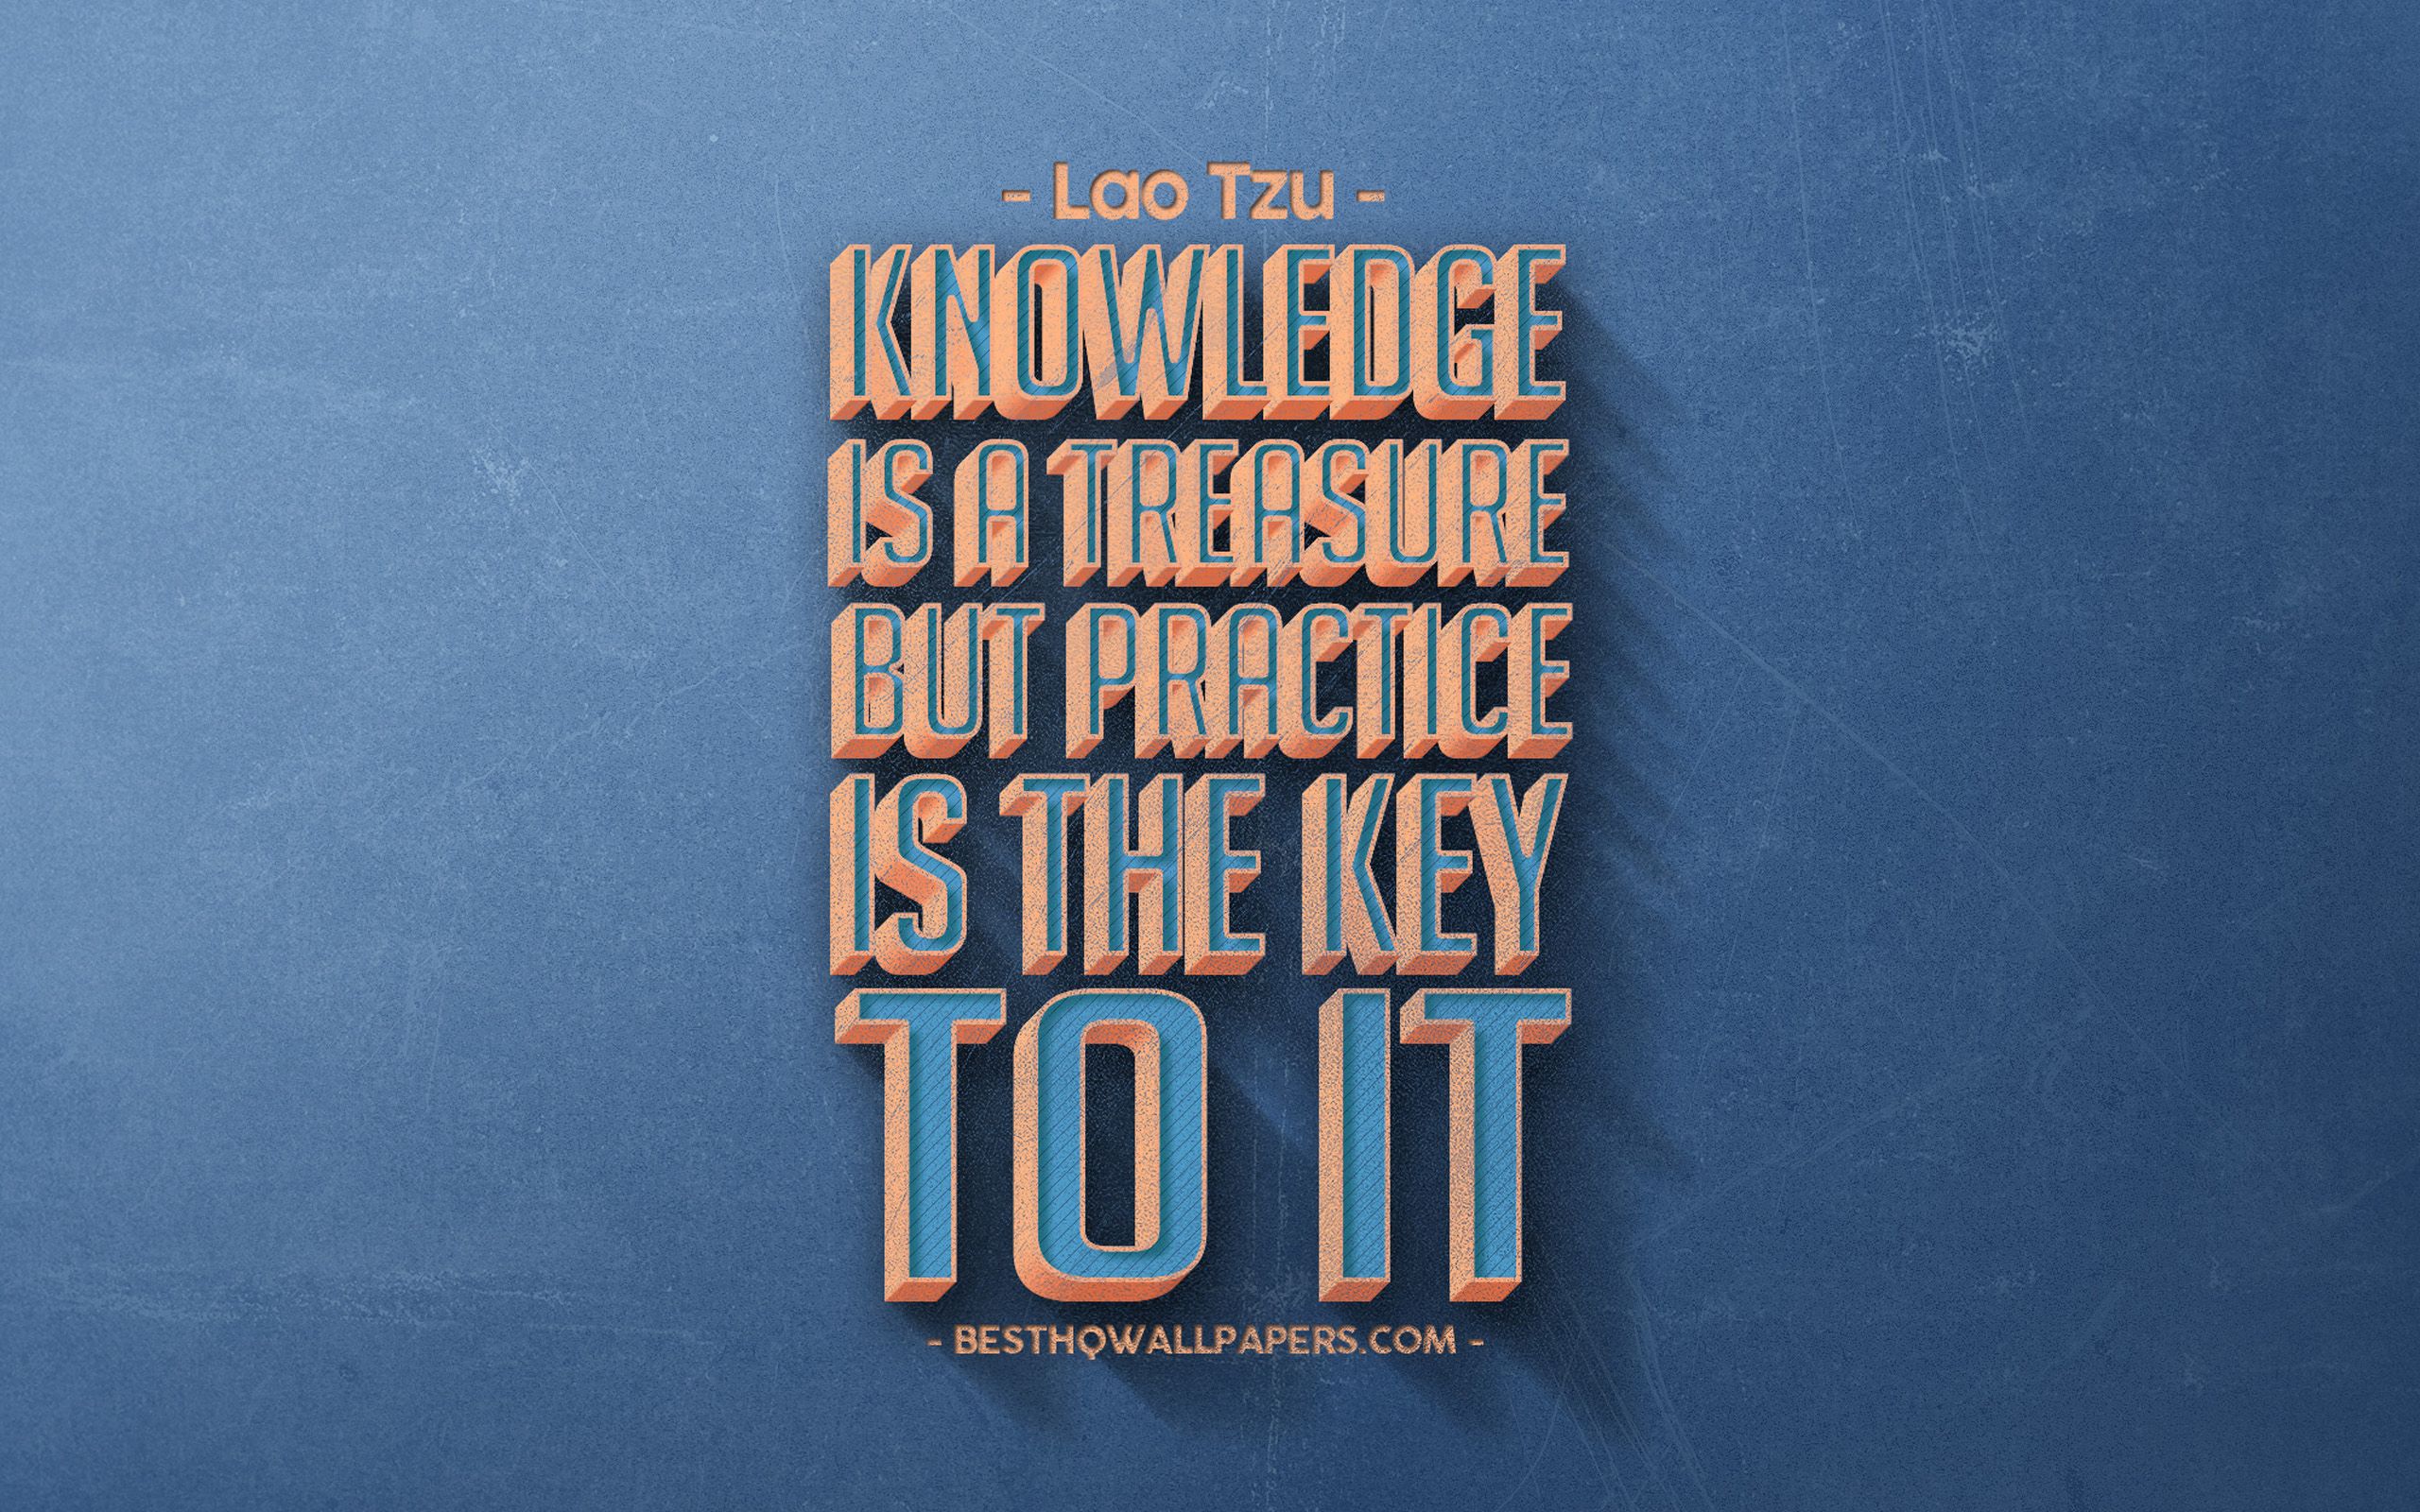 Download wallpaper Knowledge is a treasure but practice is the key to it, Lao Tzu quotes, retro style, popular quotes, motivation, quotes about knowledge, inspiration, blue retro background, blue stone texture, Lao